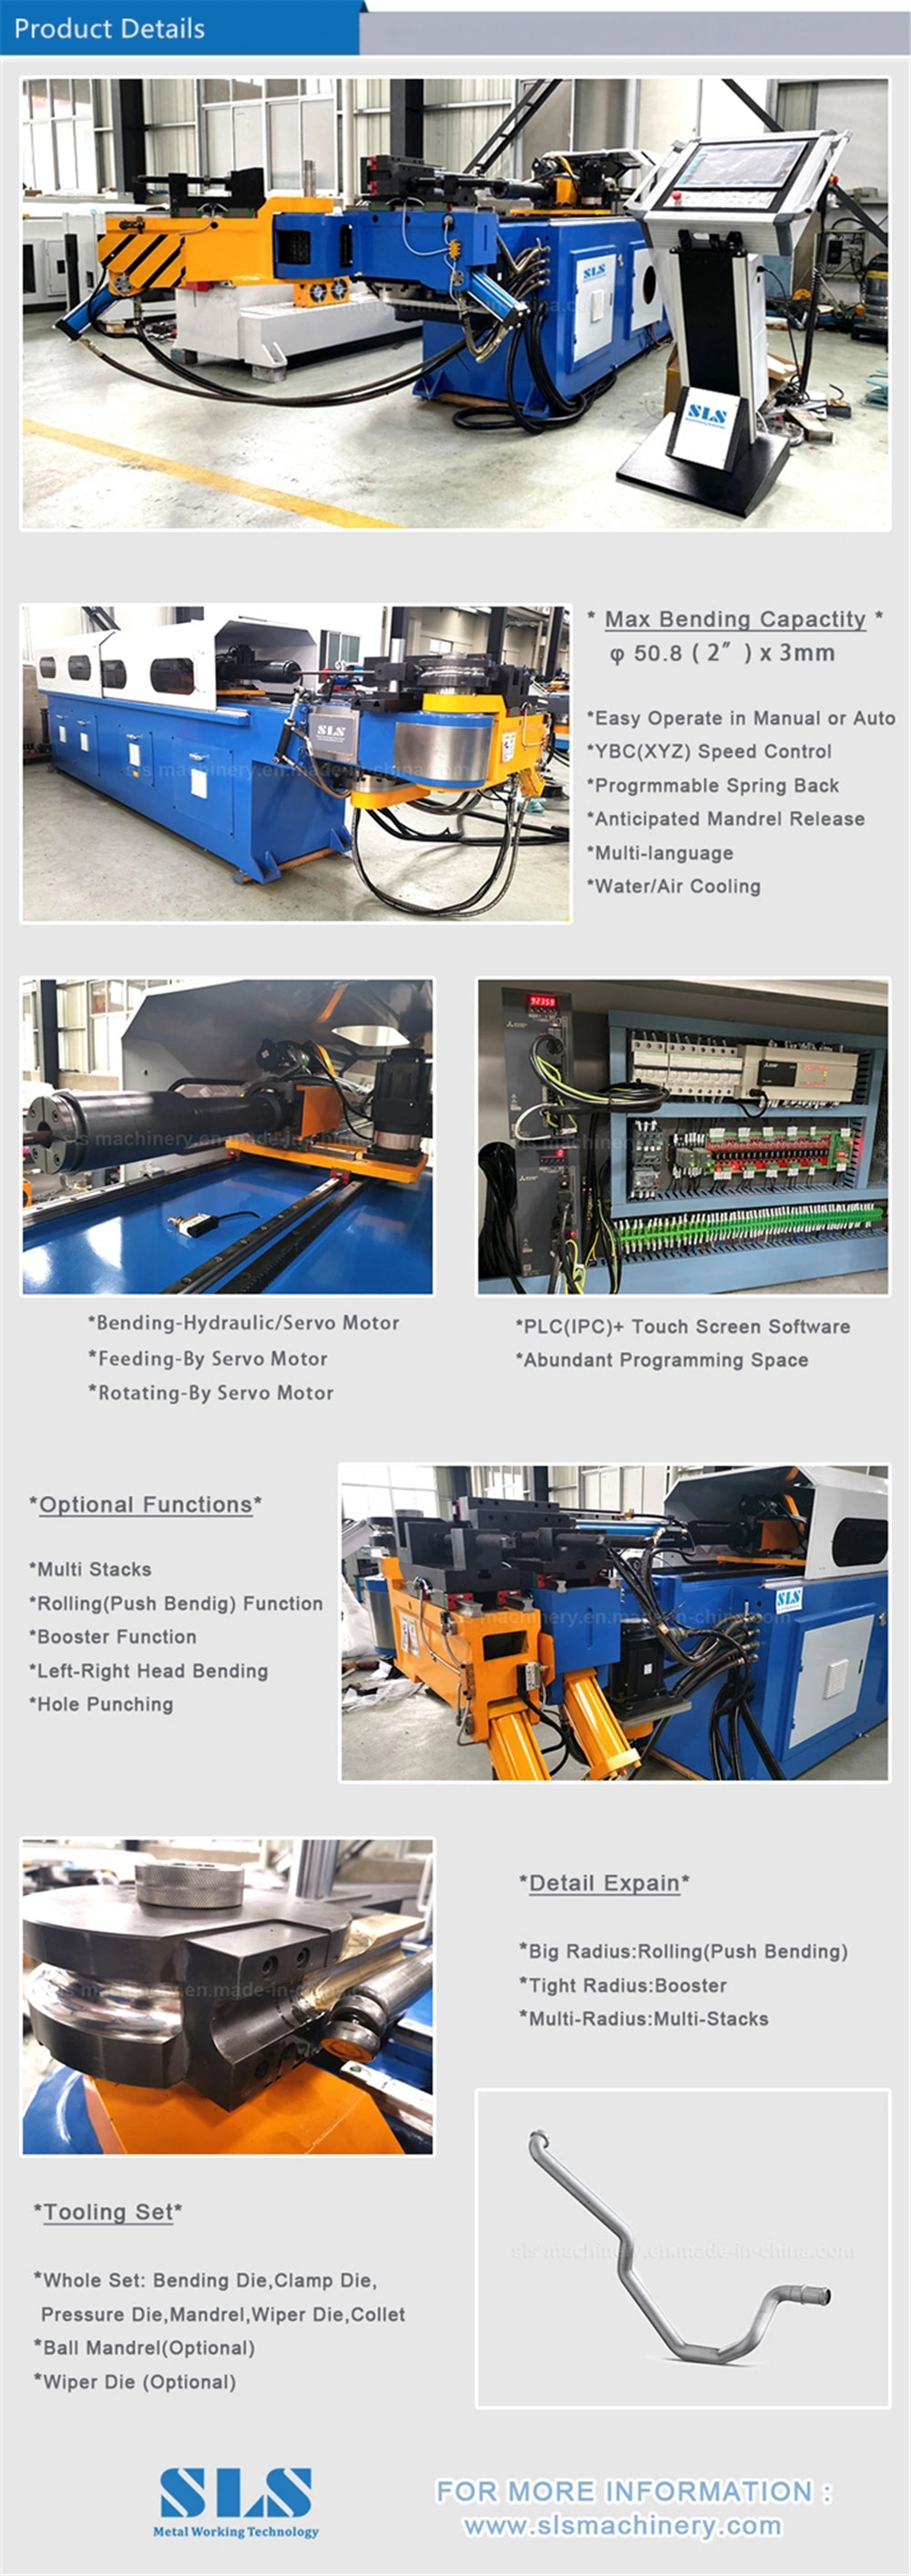 Equipped with Fuselage Protective Cover, Electric Hydraulic CNC Pipe Bender Machine, Multi Function Automatic Tube Bending Tools